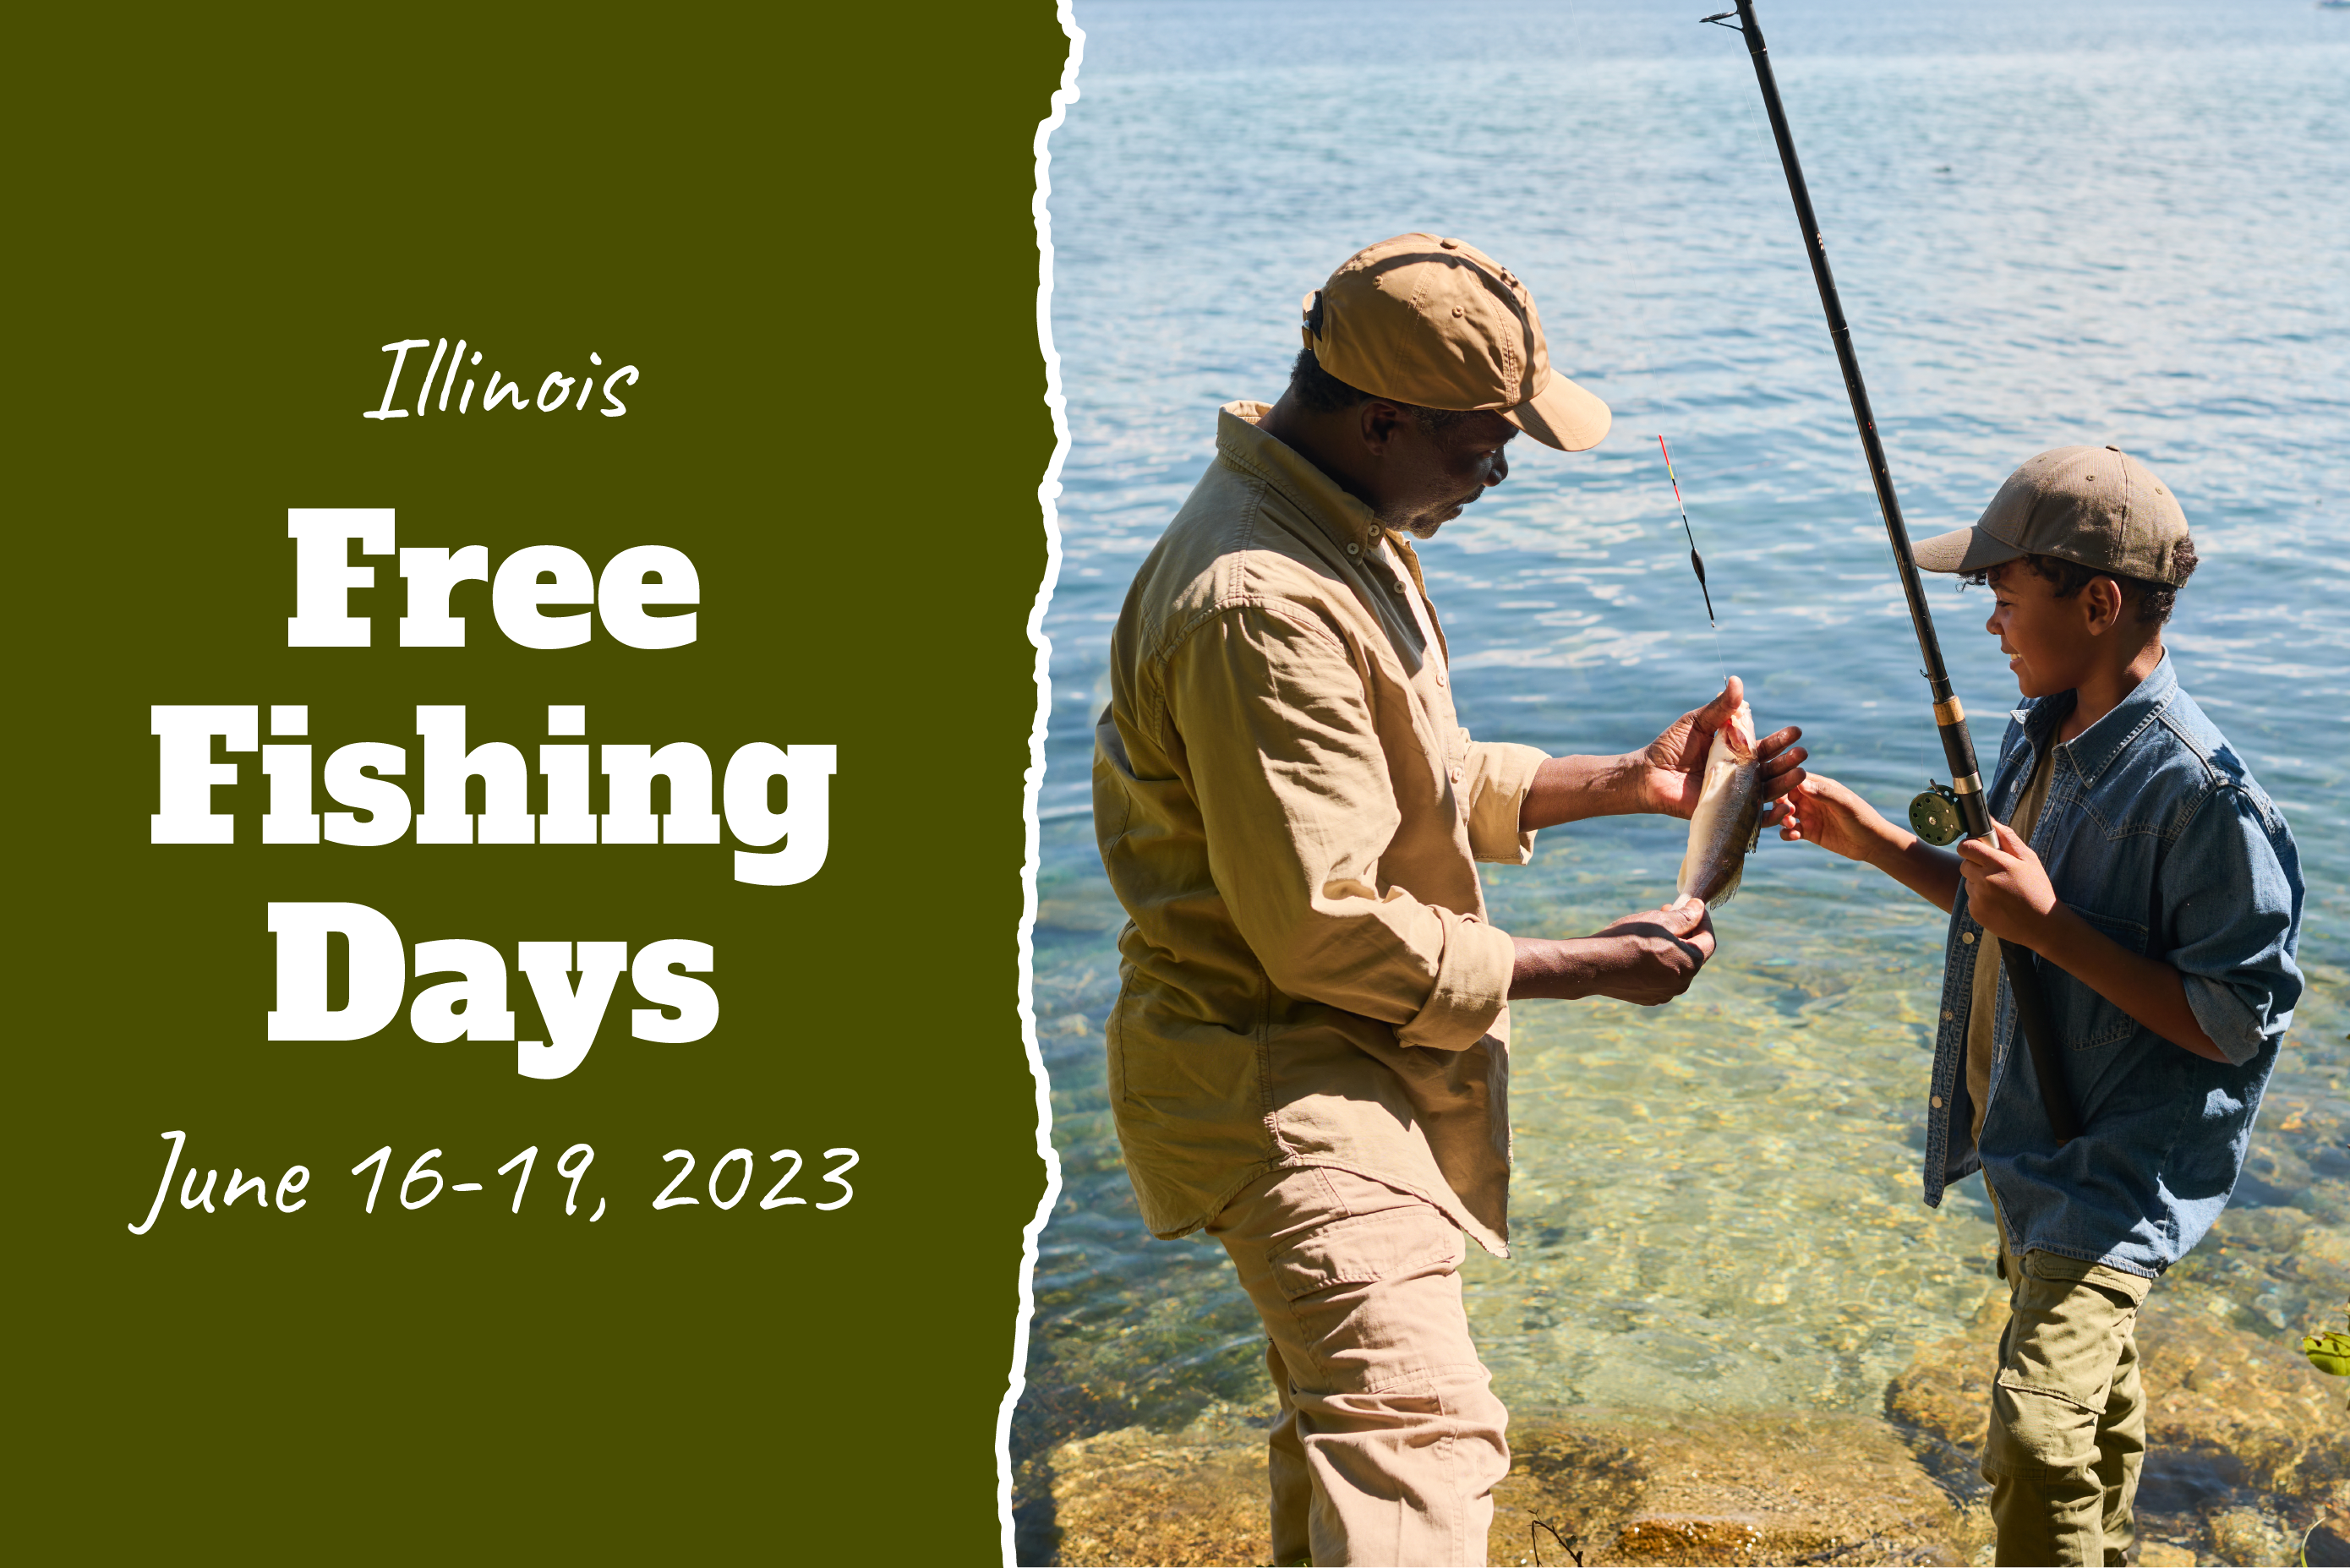 Illinois Free Fishing Days from June 16-19. Start Planning Your Trip - Mike  Coffey